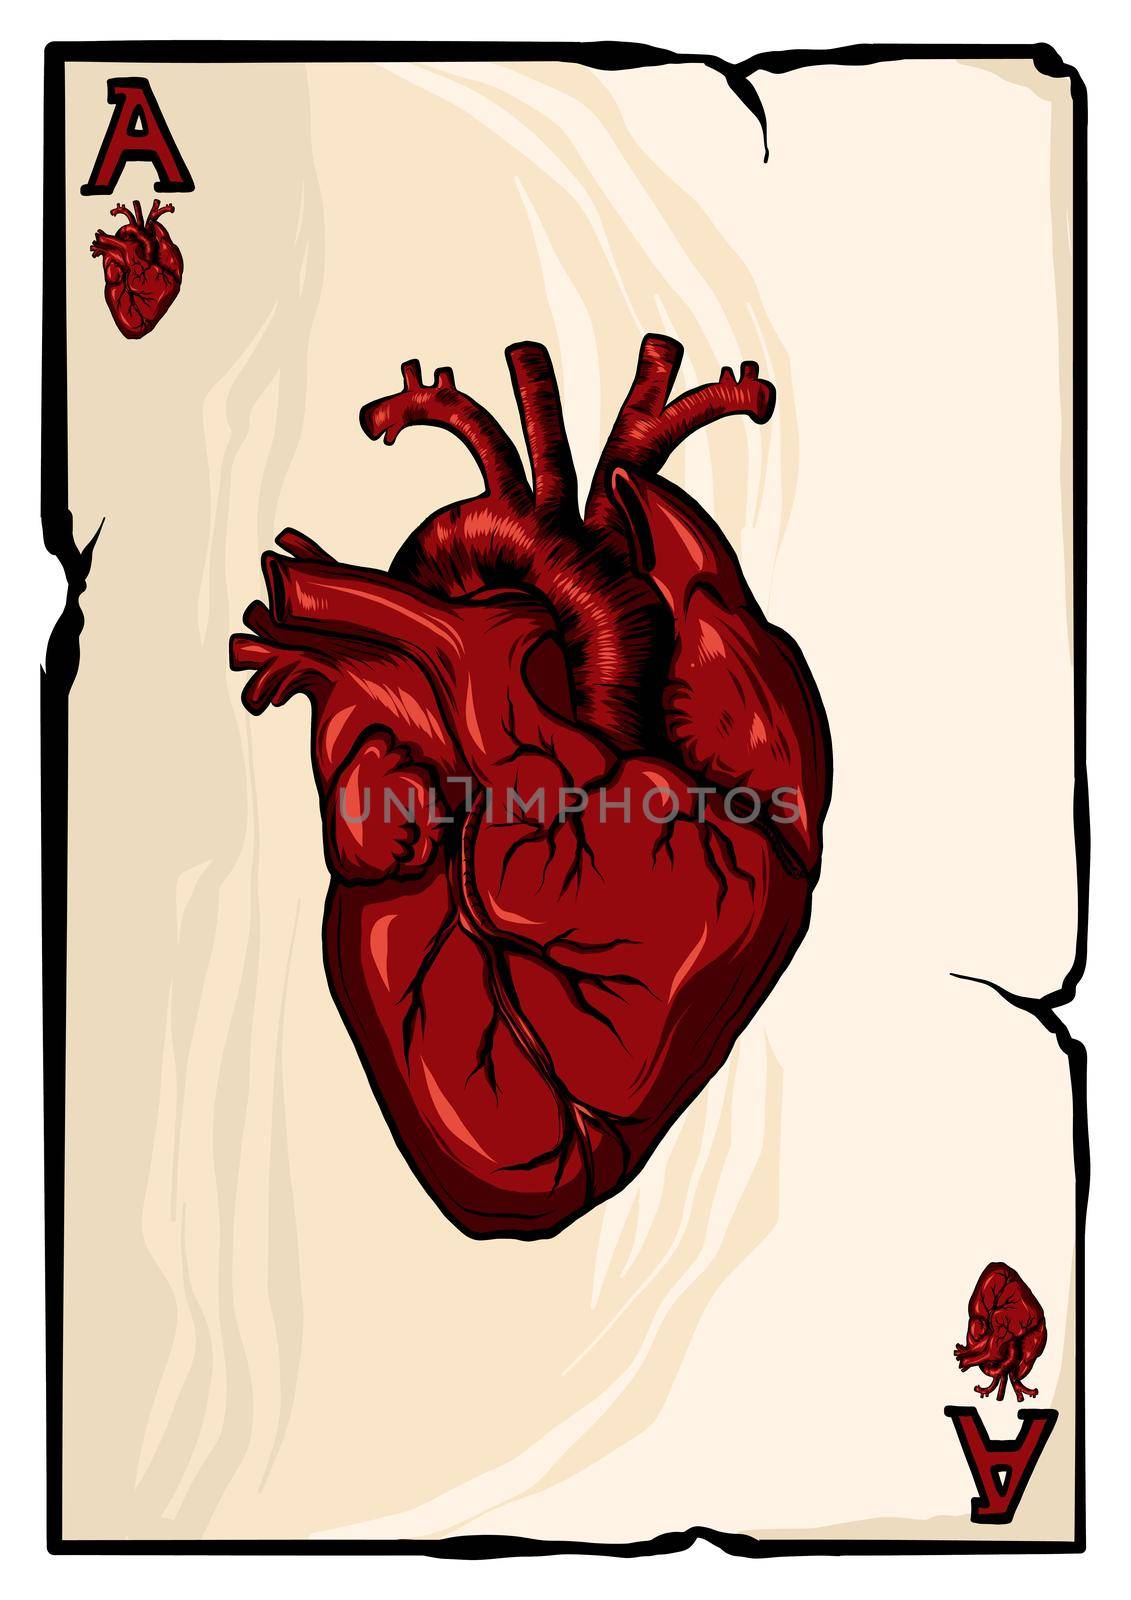 Ace of hearts on white background. illustration. by dean